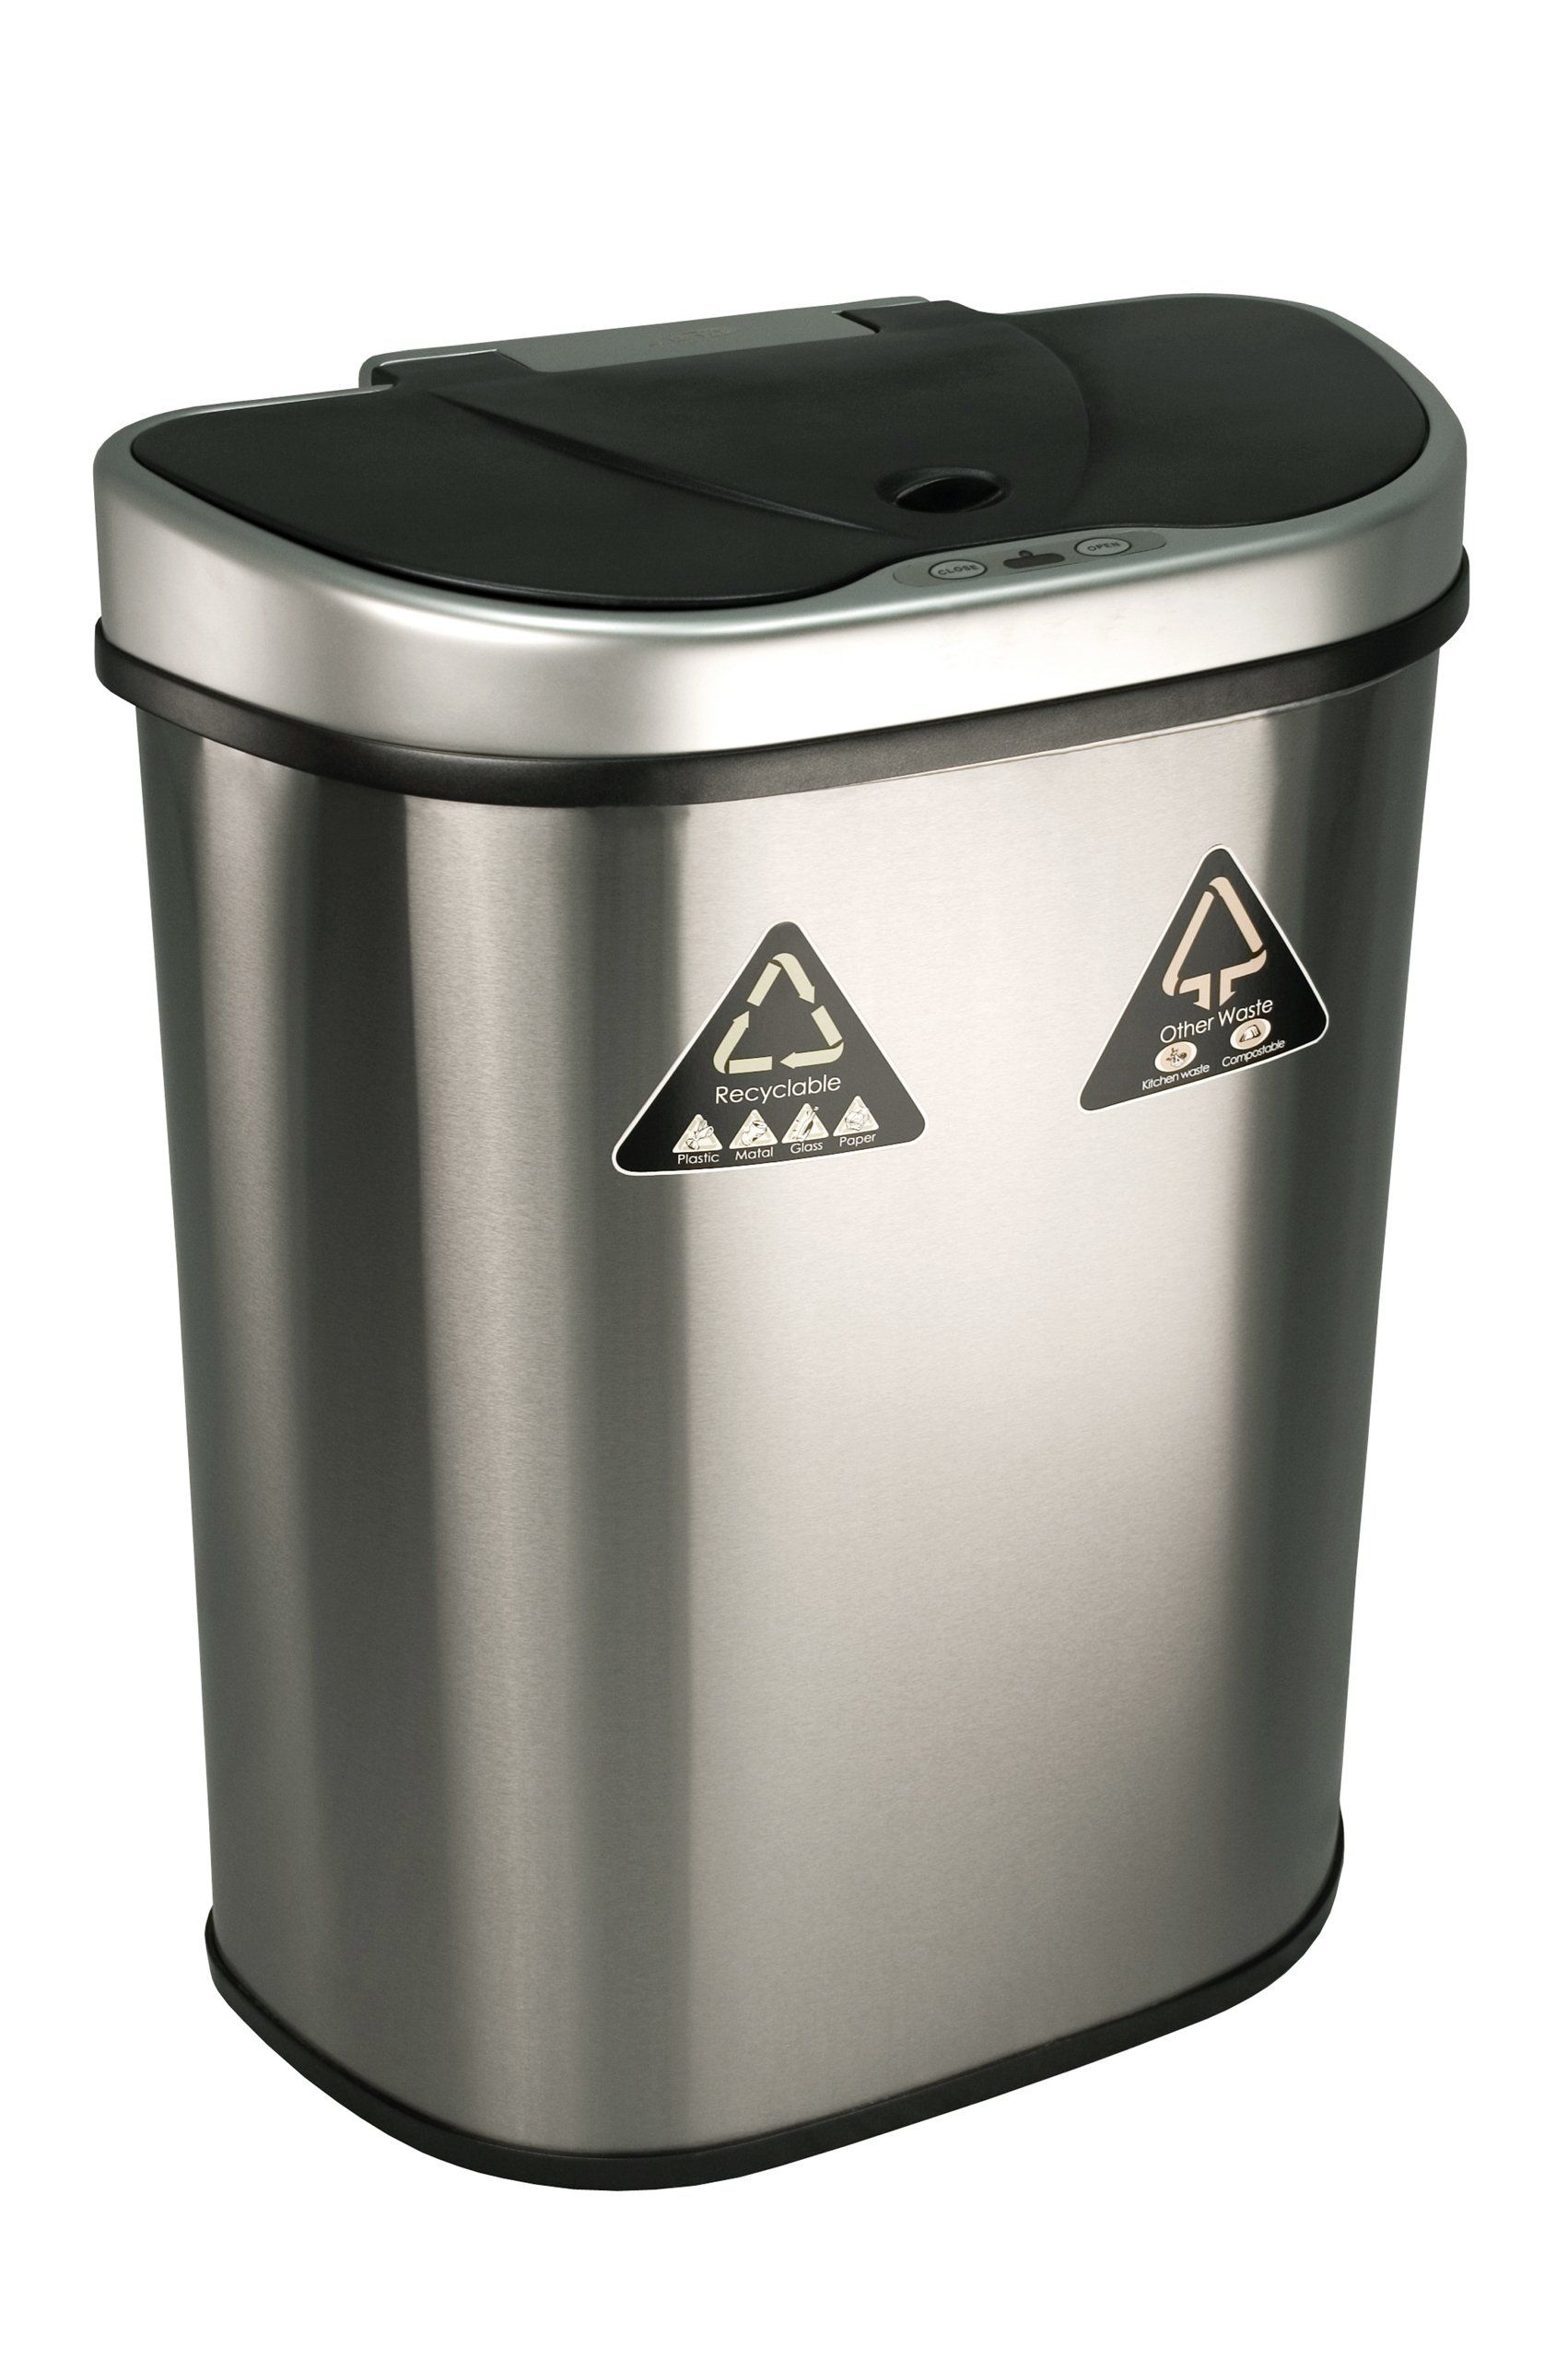 Hands Free Trash Cans: Get The Most From Rubbermaid